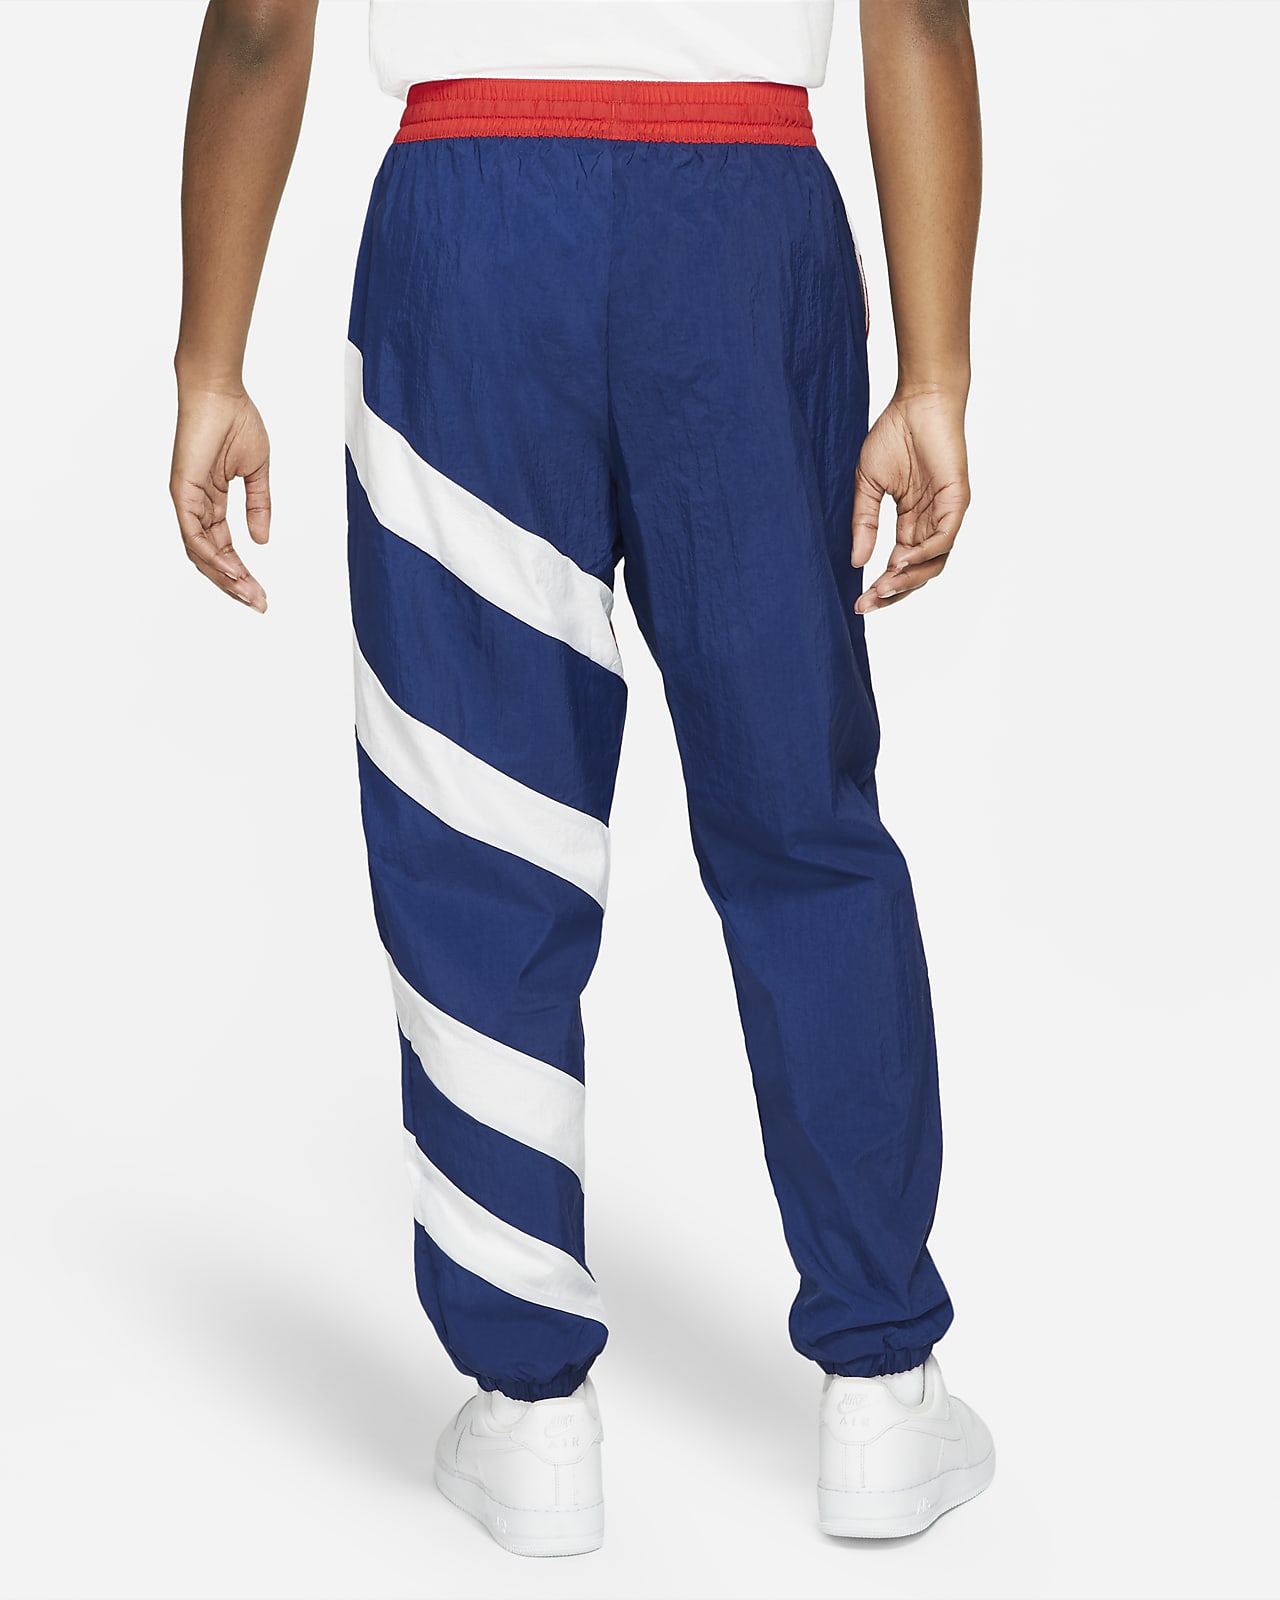 blue and white nike pants